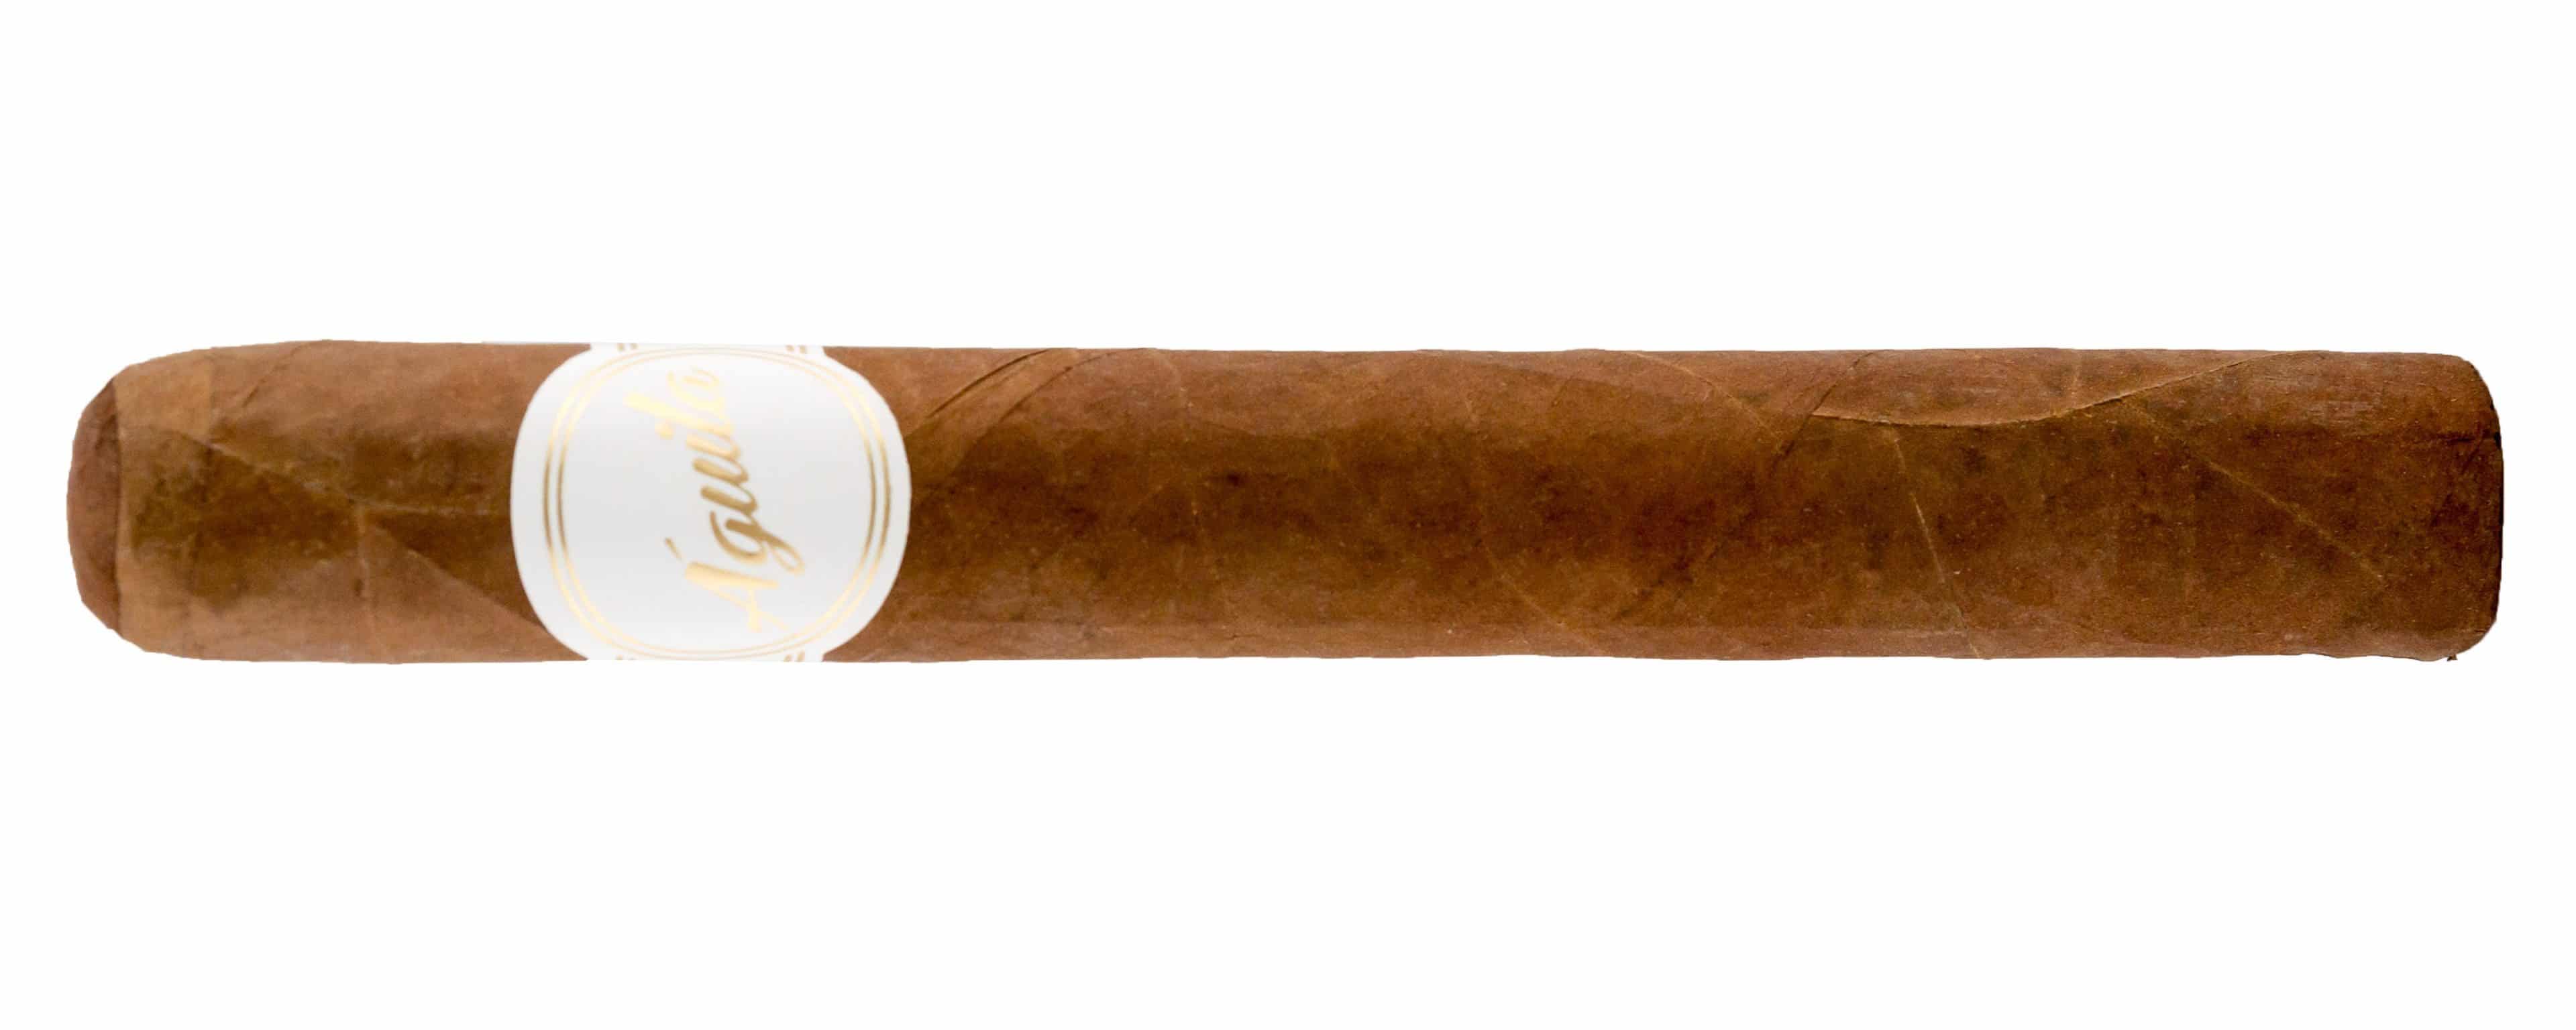 Blind Cigar Review: Aguila | Sublime (Revisited)